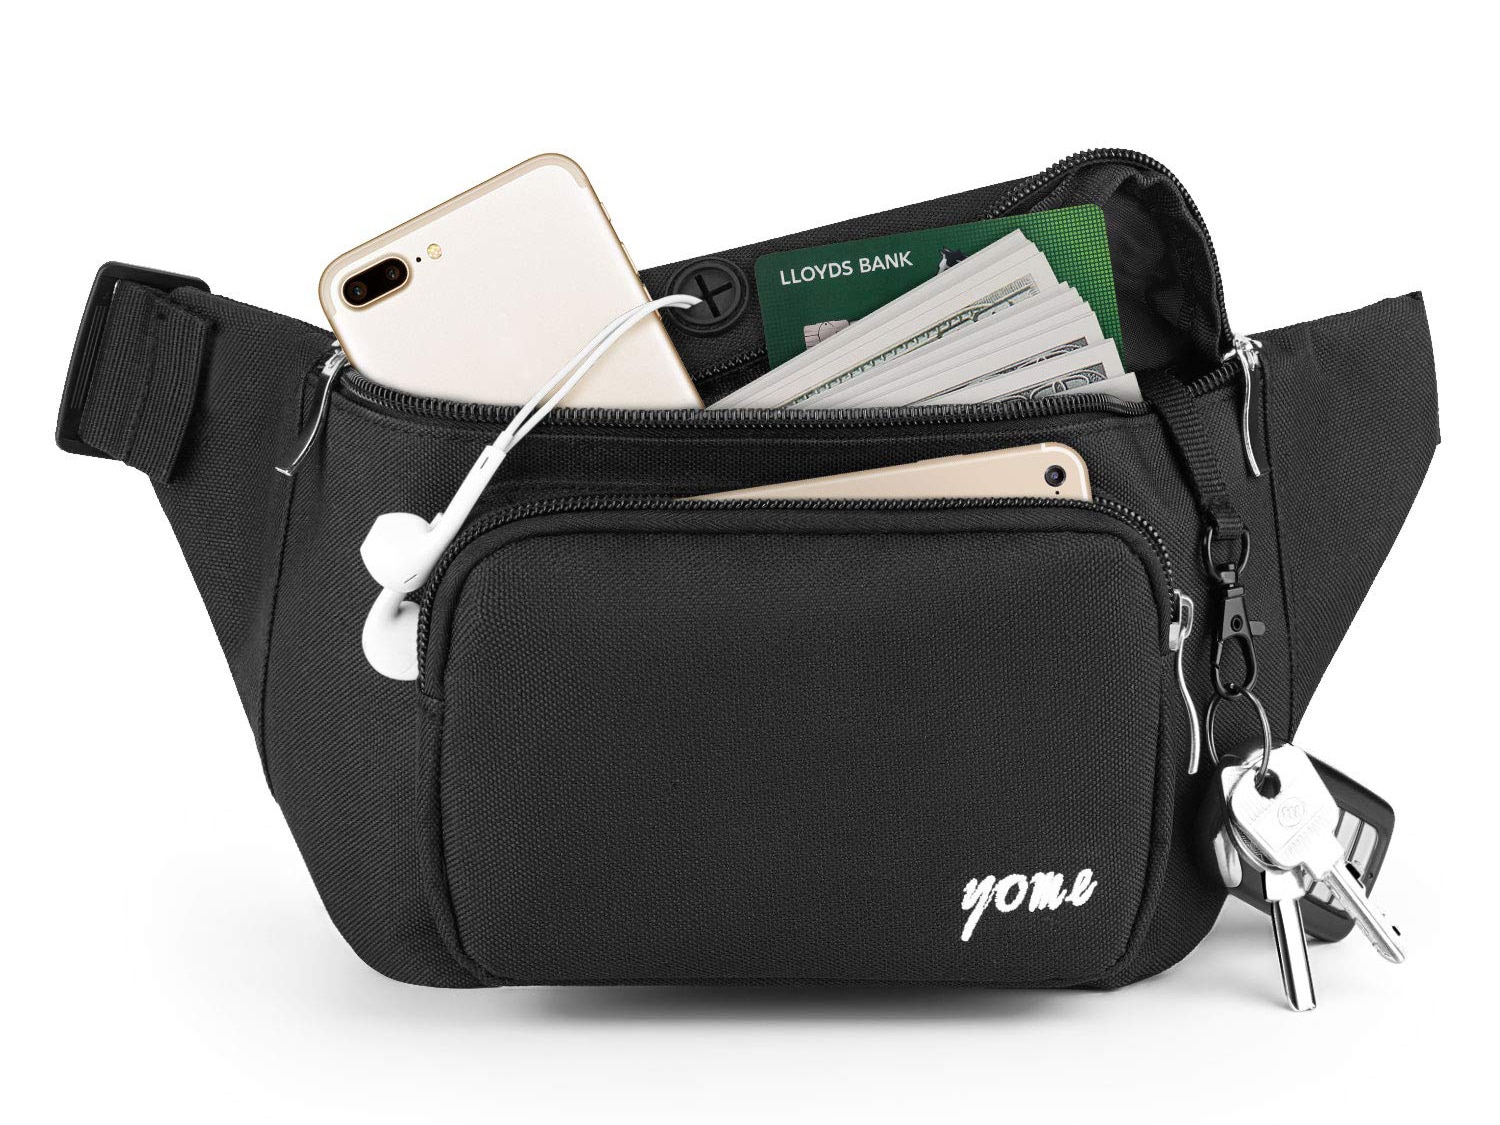 Yome Fanny Pack